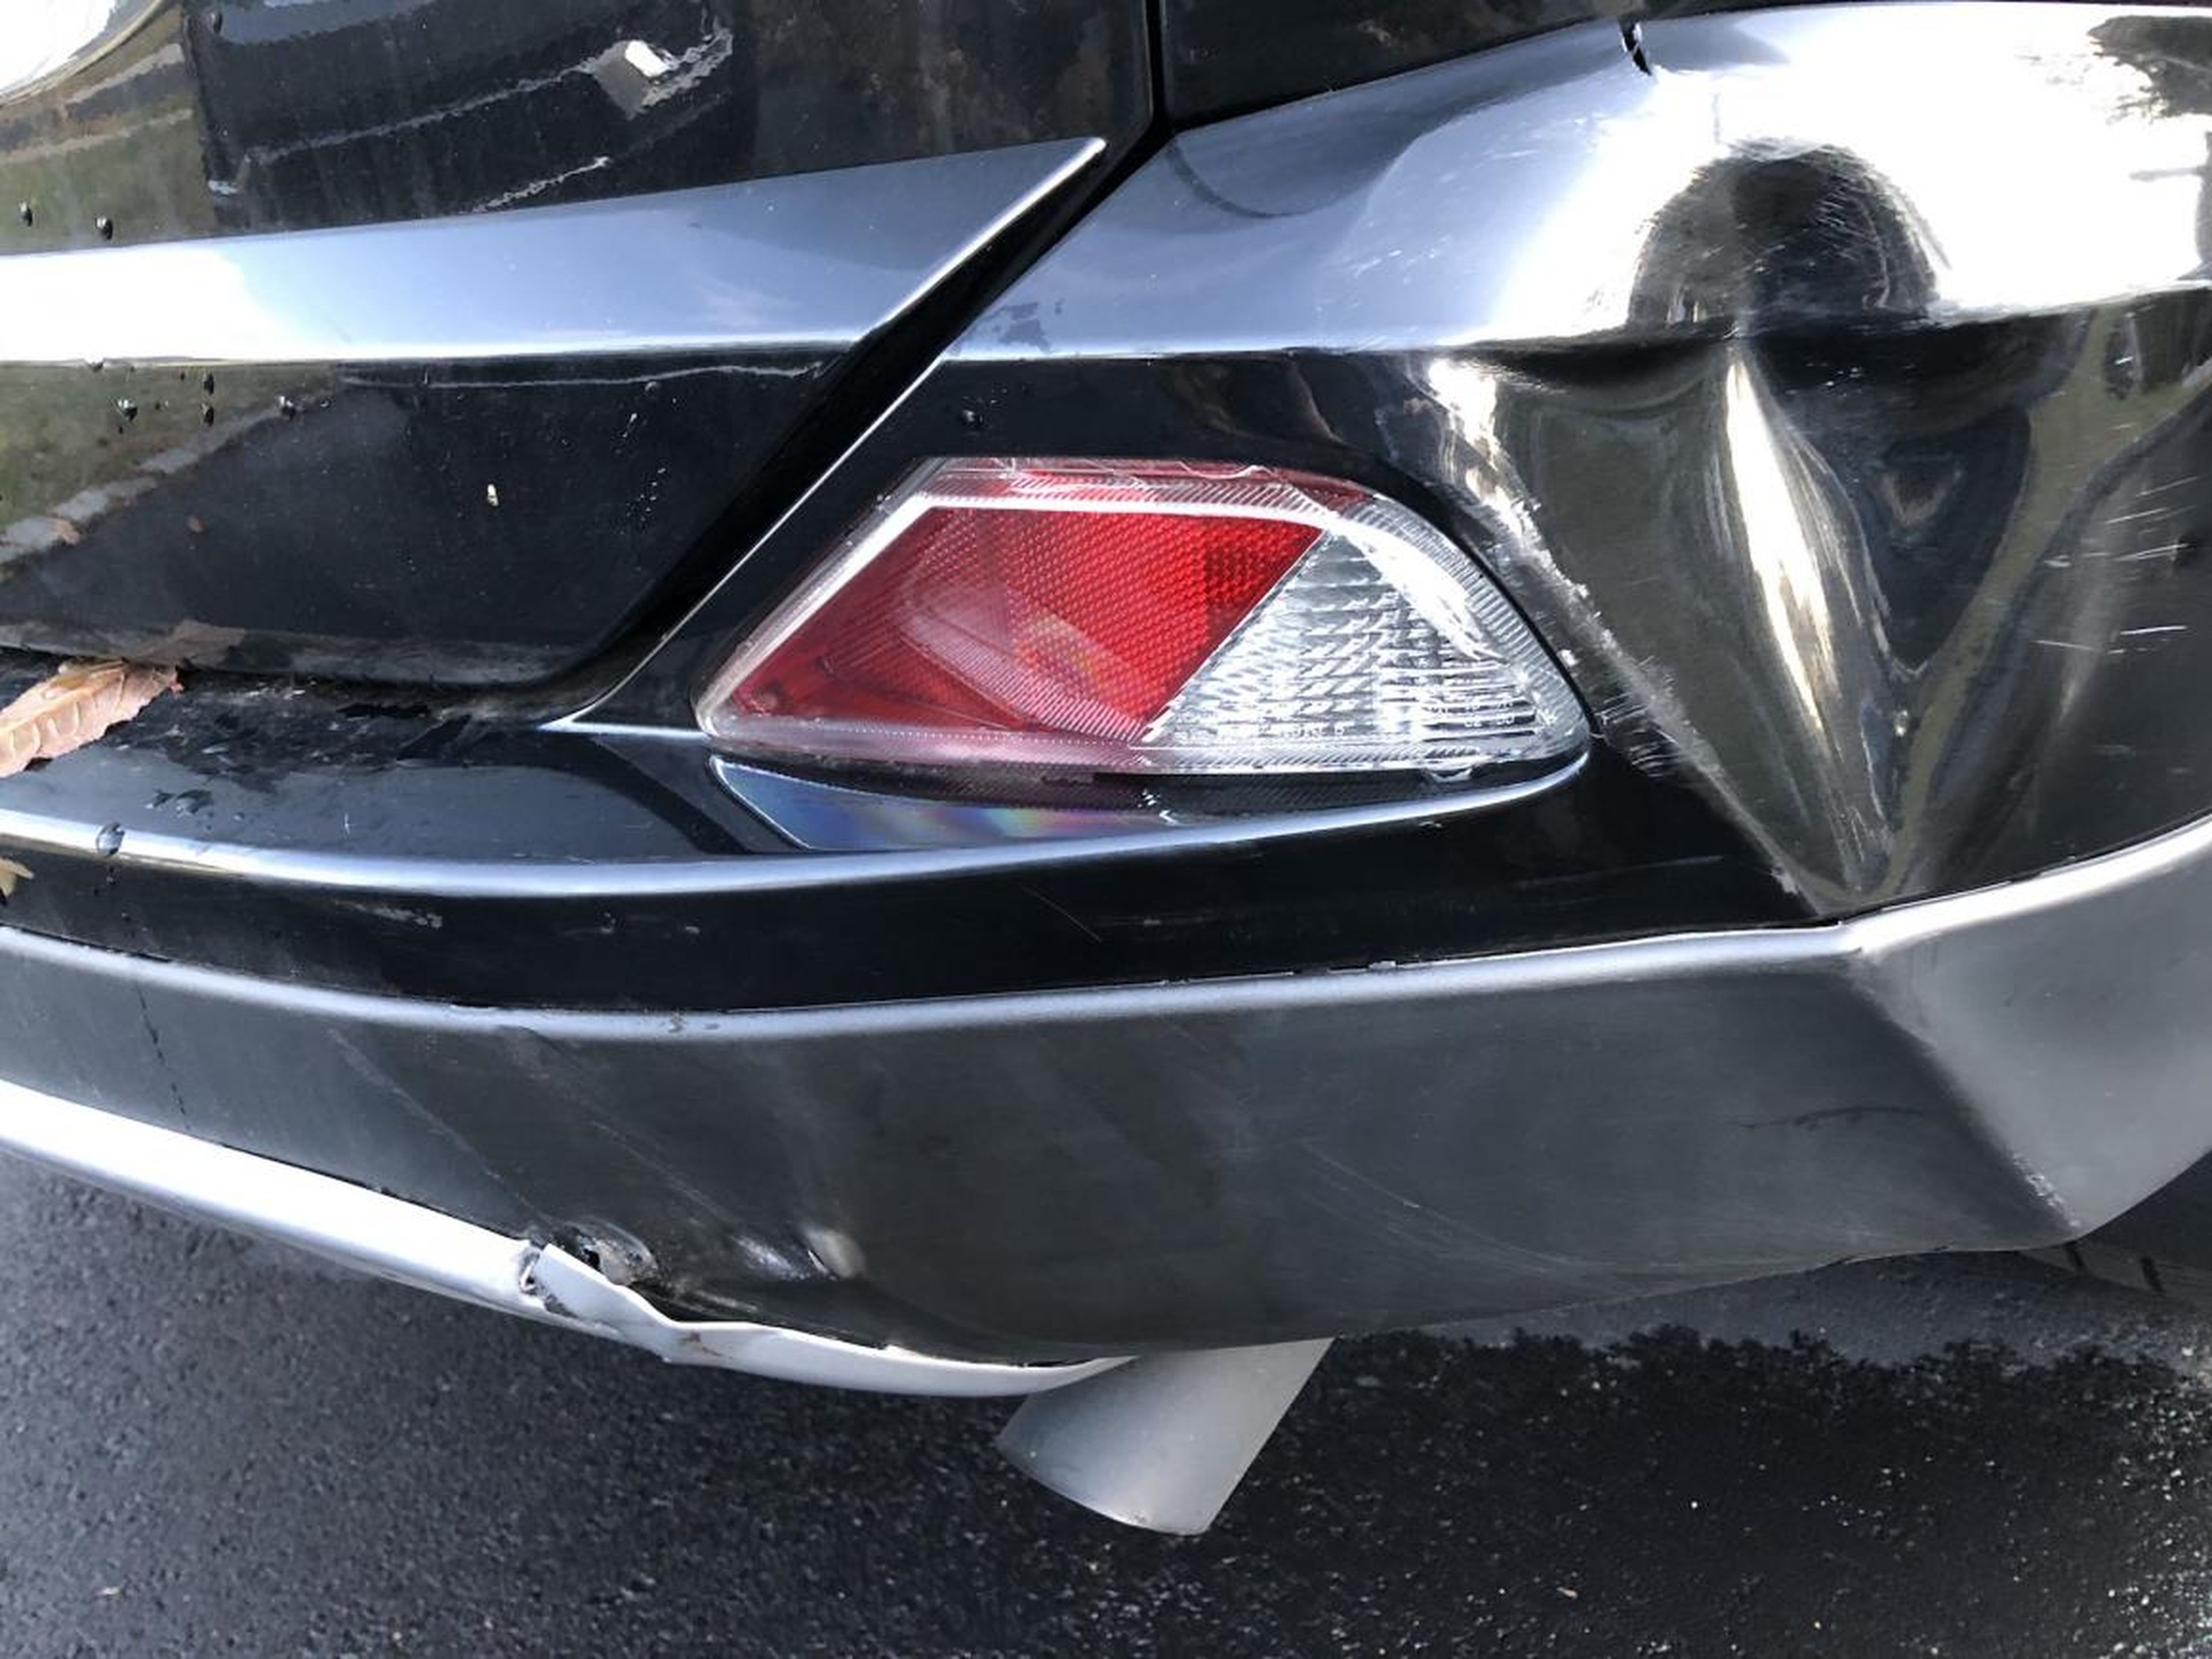 This isn't going to be a serious repair — just enough to hold by bumper together for a few months. I also have to deal with that damage to the trim down by the exhaust pipe. And I'm not going to worry about that dent.